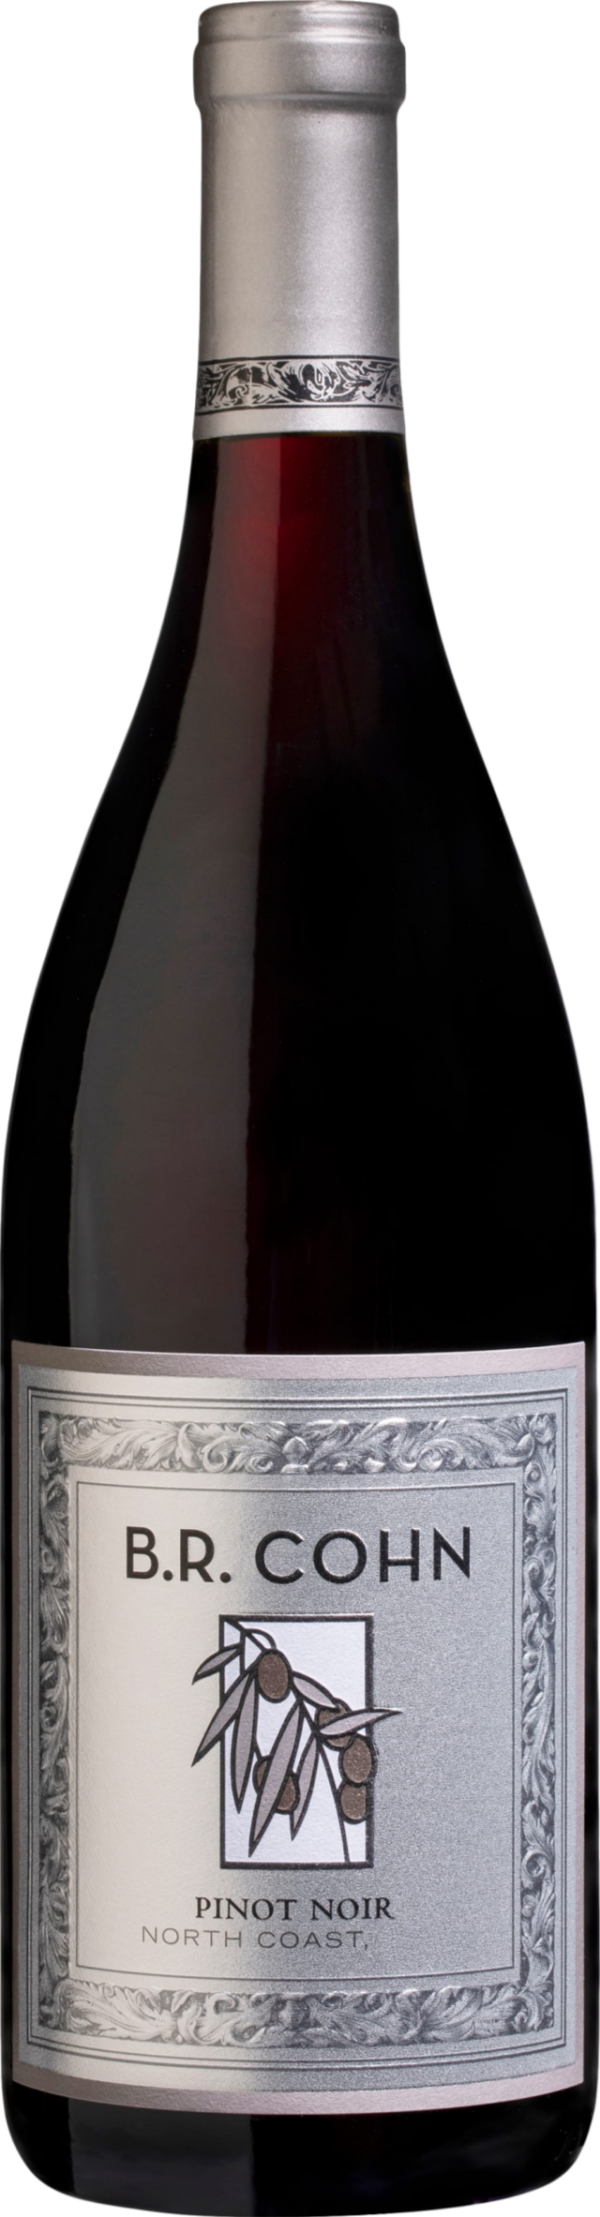 Product image of B. R. Cohn Silver Label Pinot Noir 2021 from 8wines